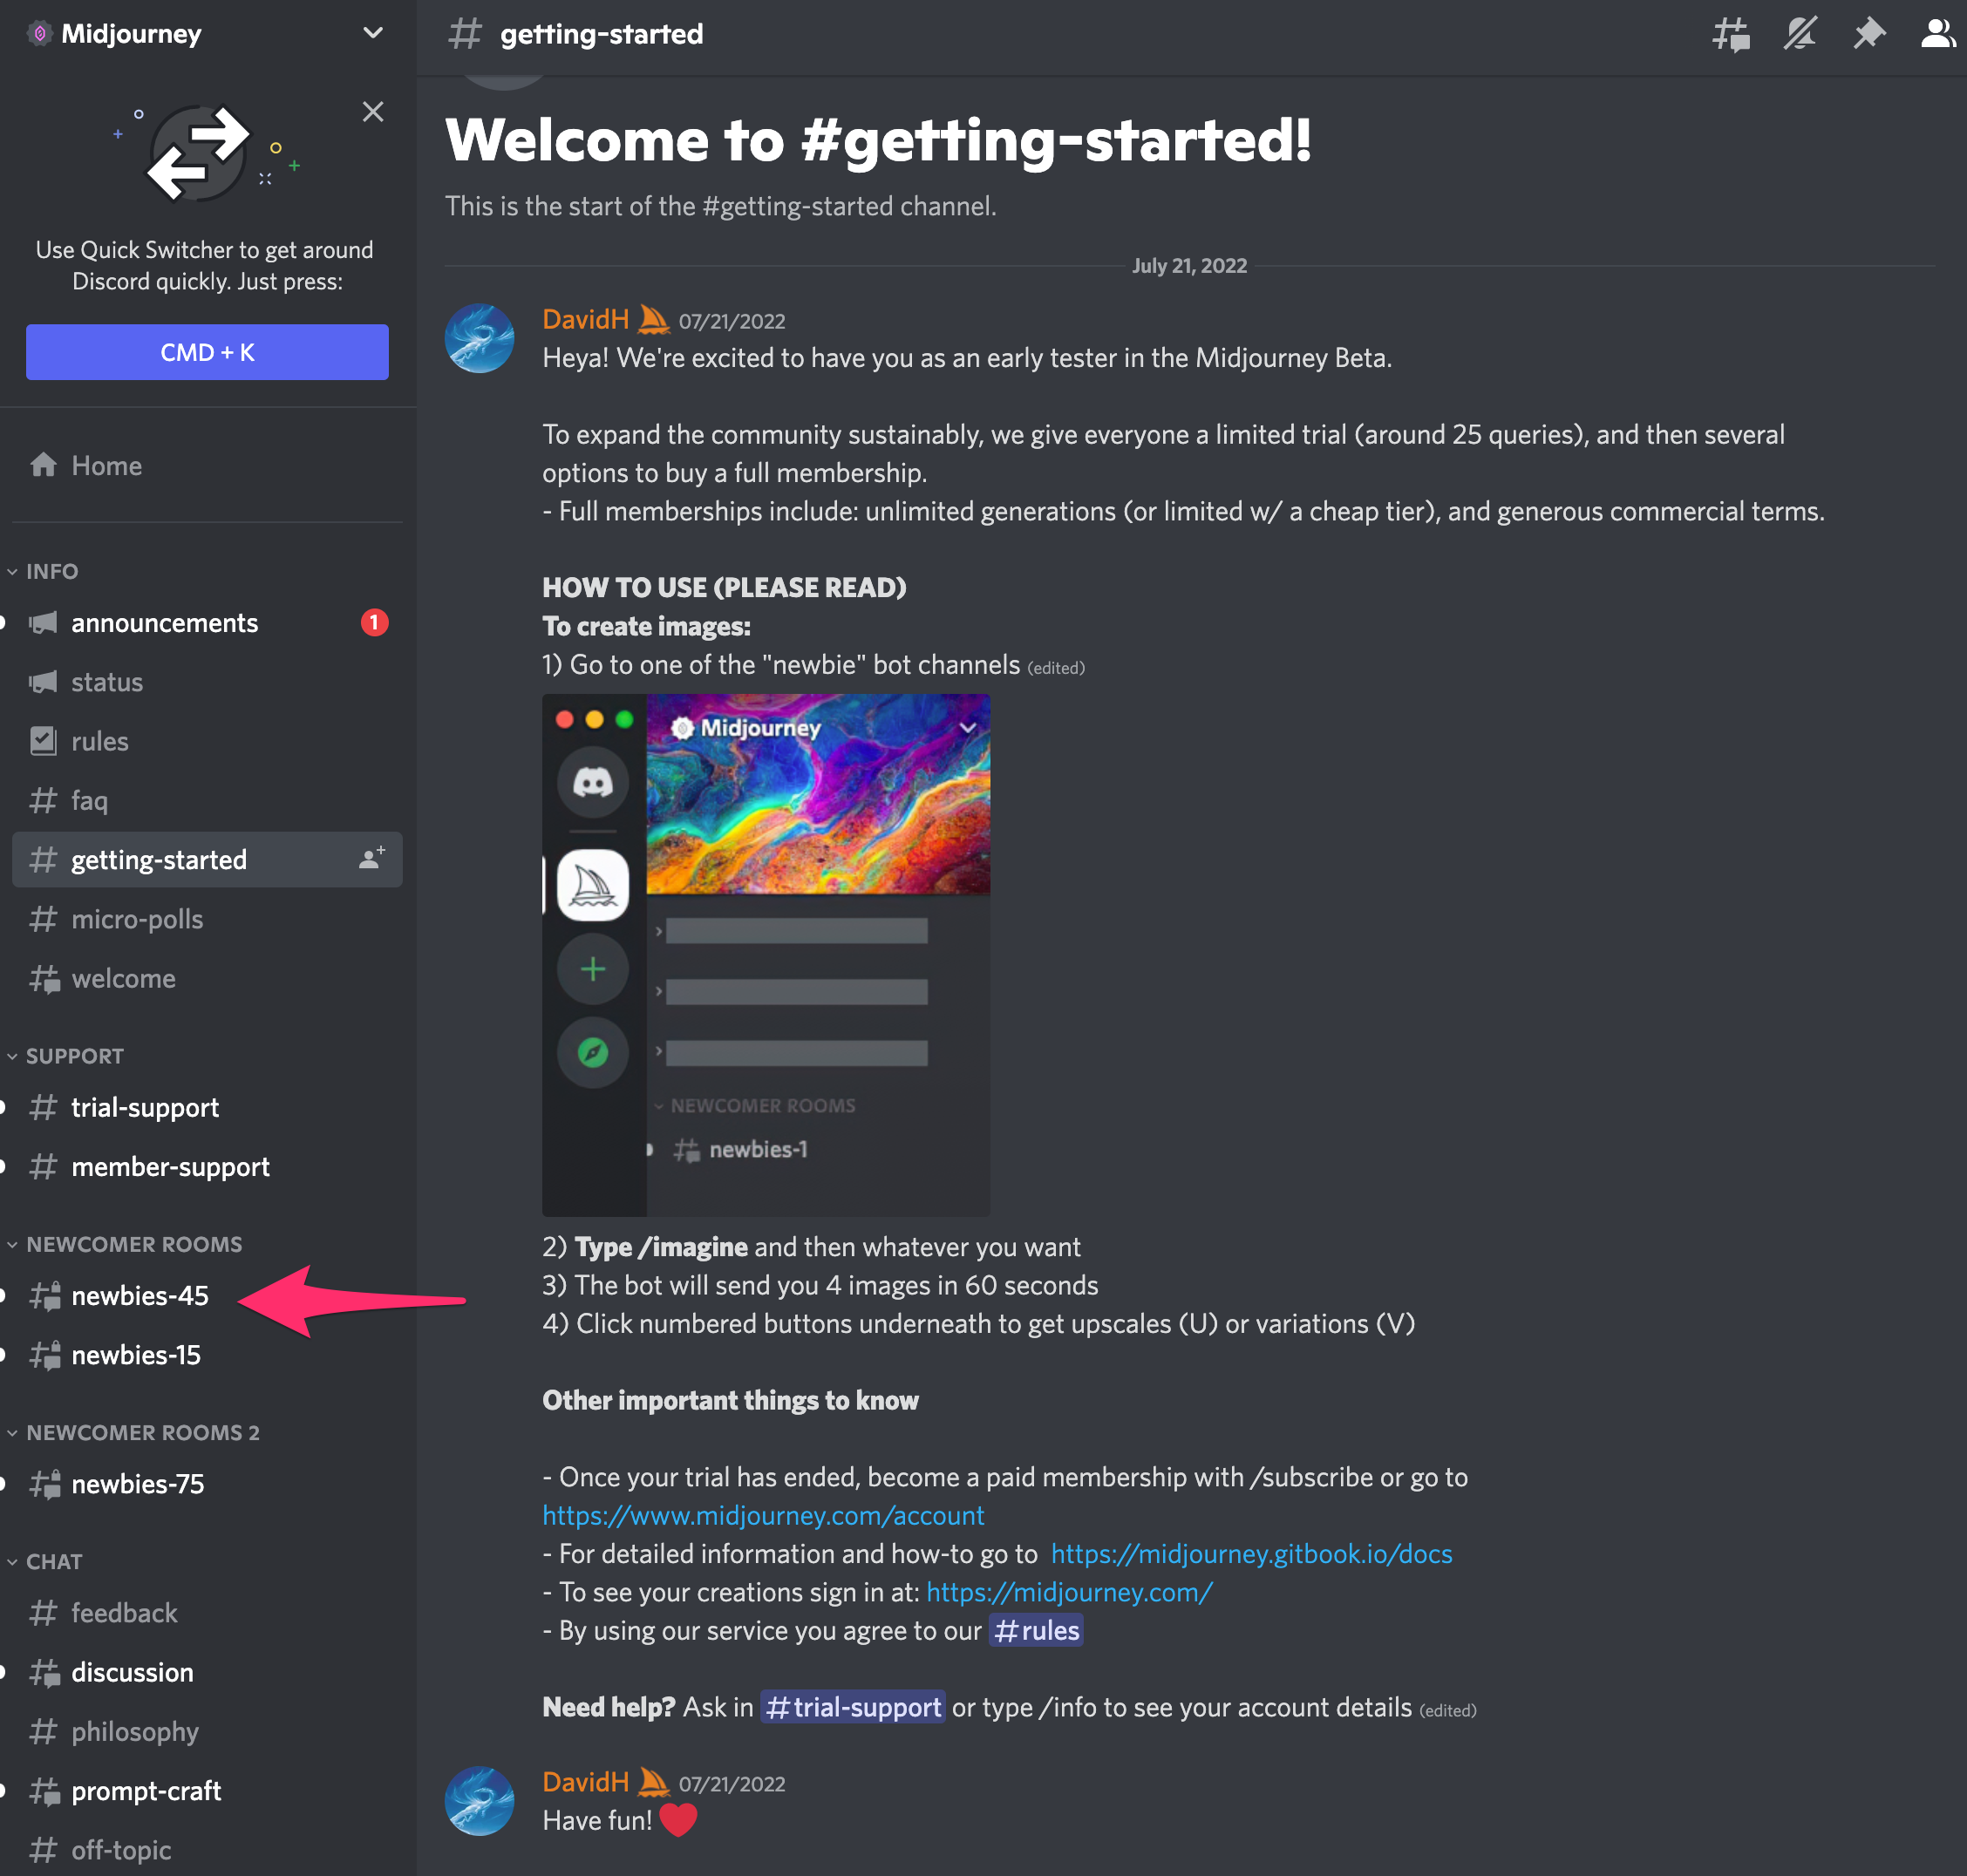 A screenshot of the Discord Midjourney getting-started screen